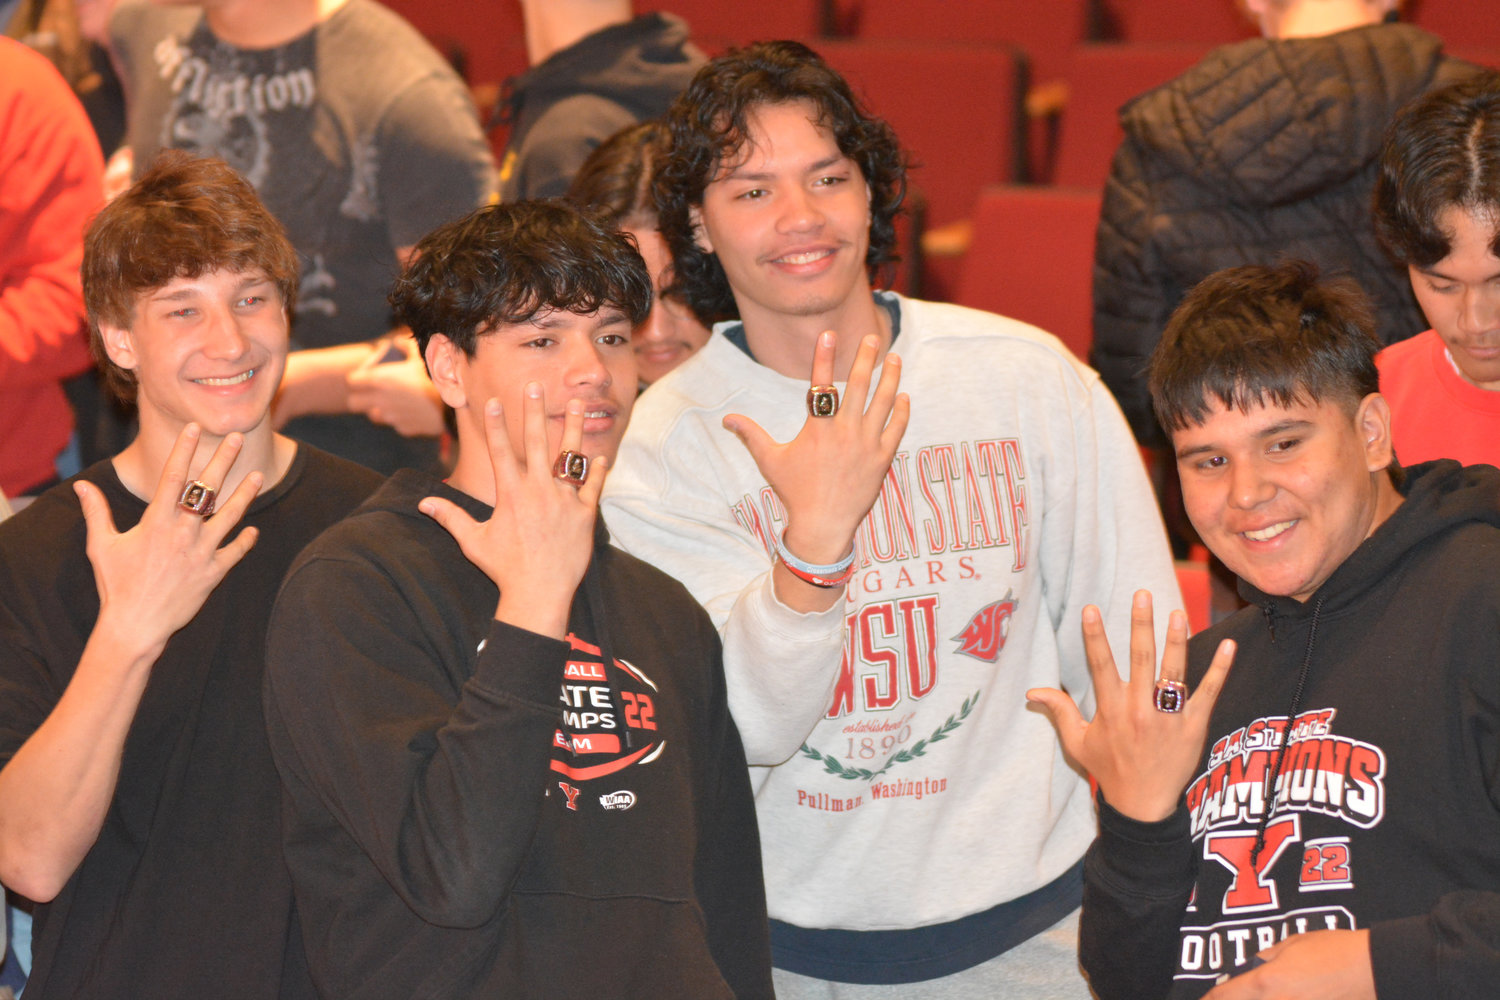 Jordan Lasher, Marius Aalona, Damian Aalona and Ace Youckton show off their new championship rings at Yelm High School on Monday, March 27.